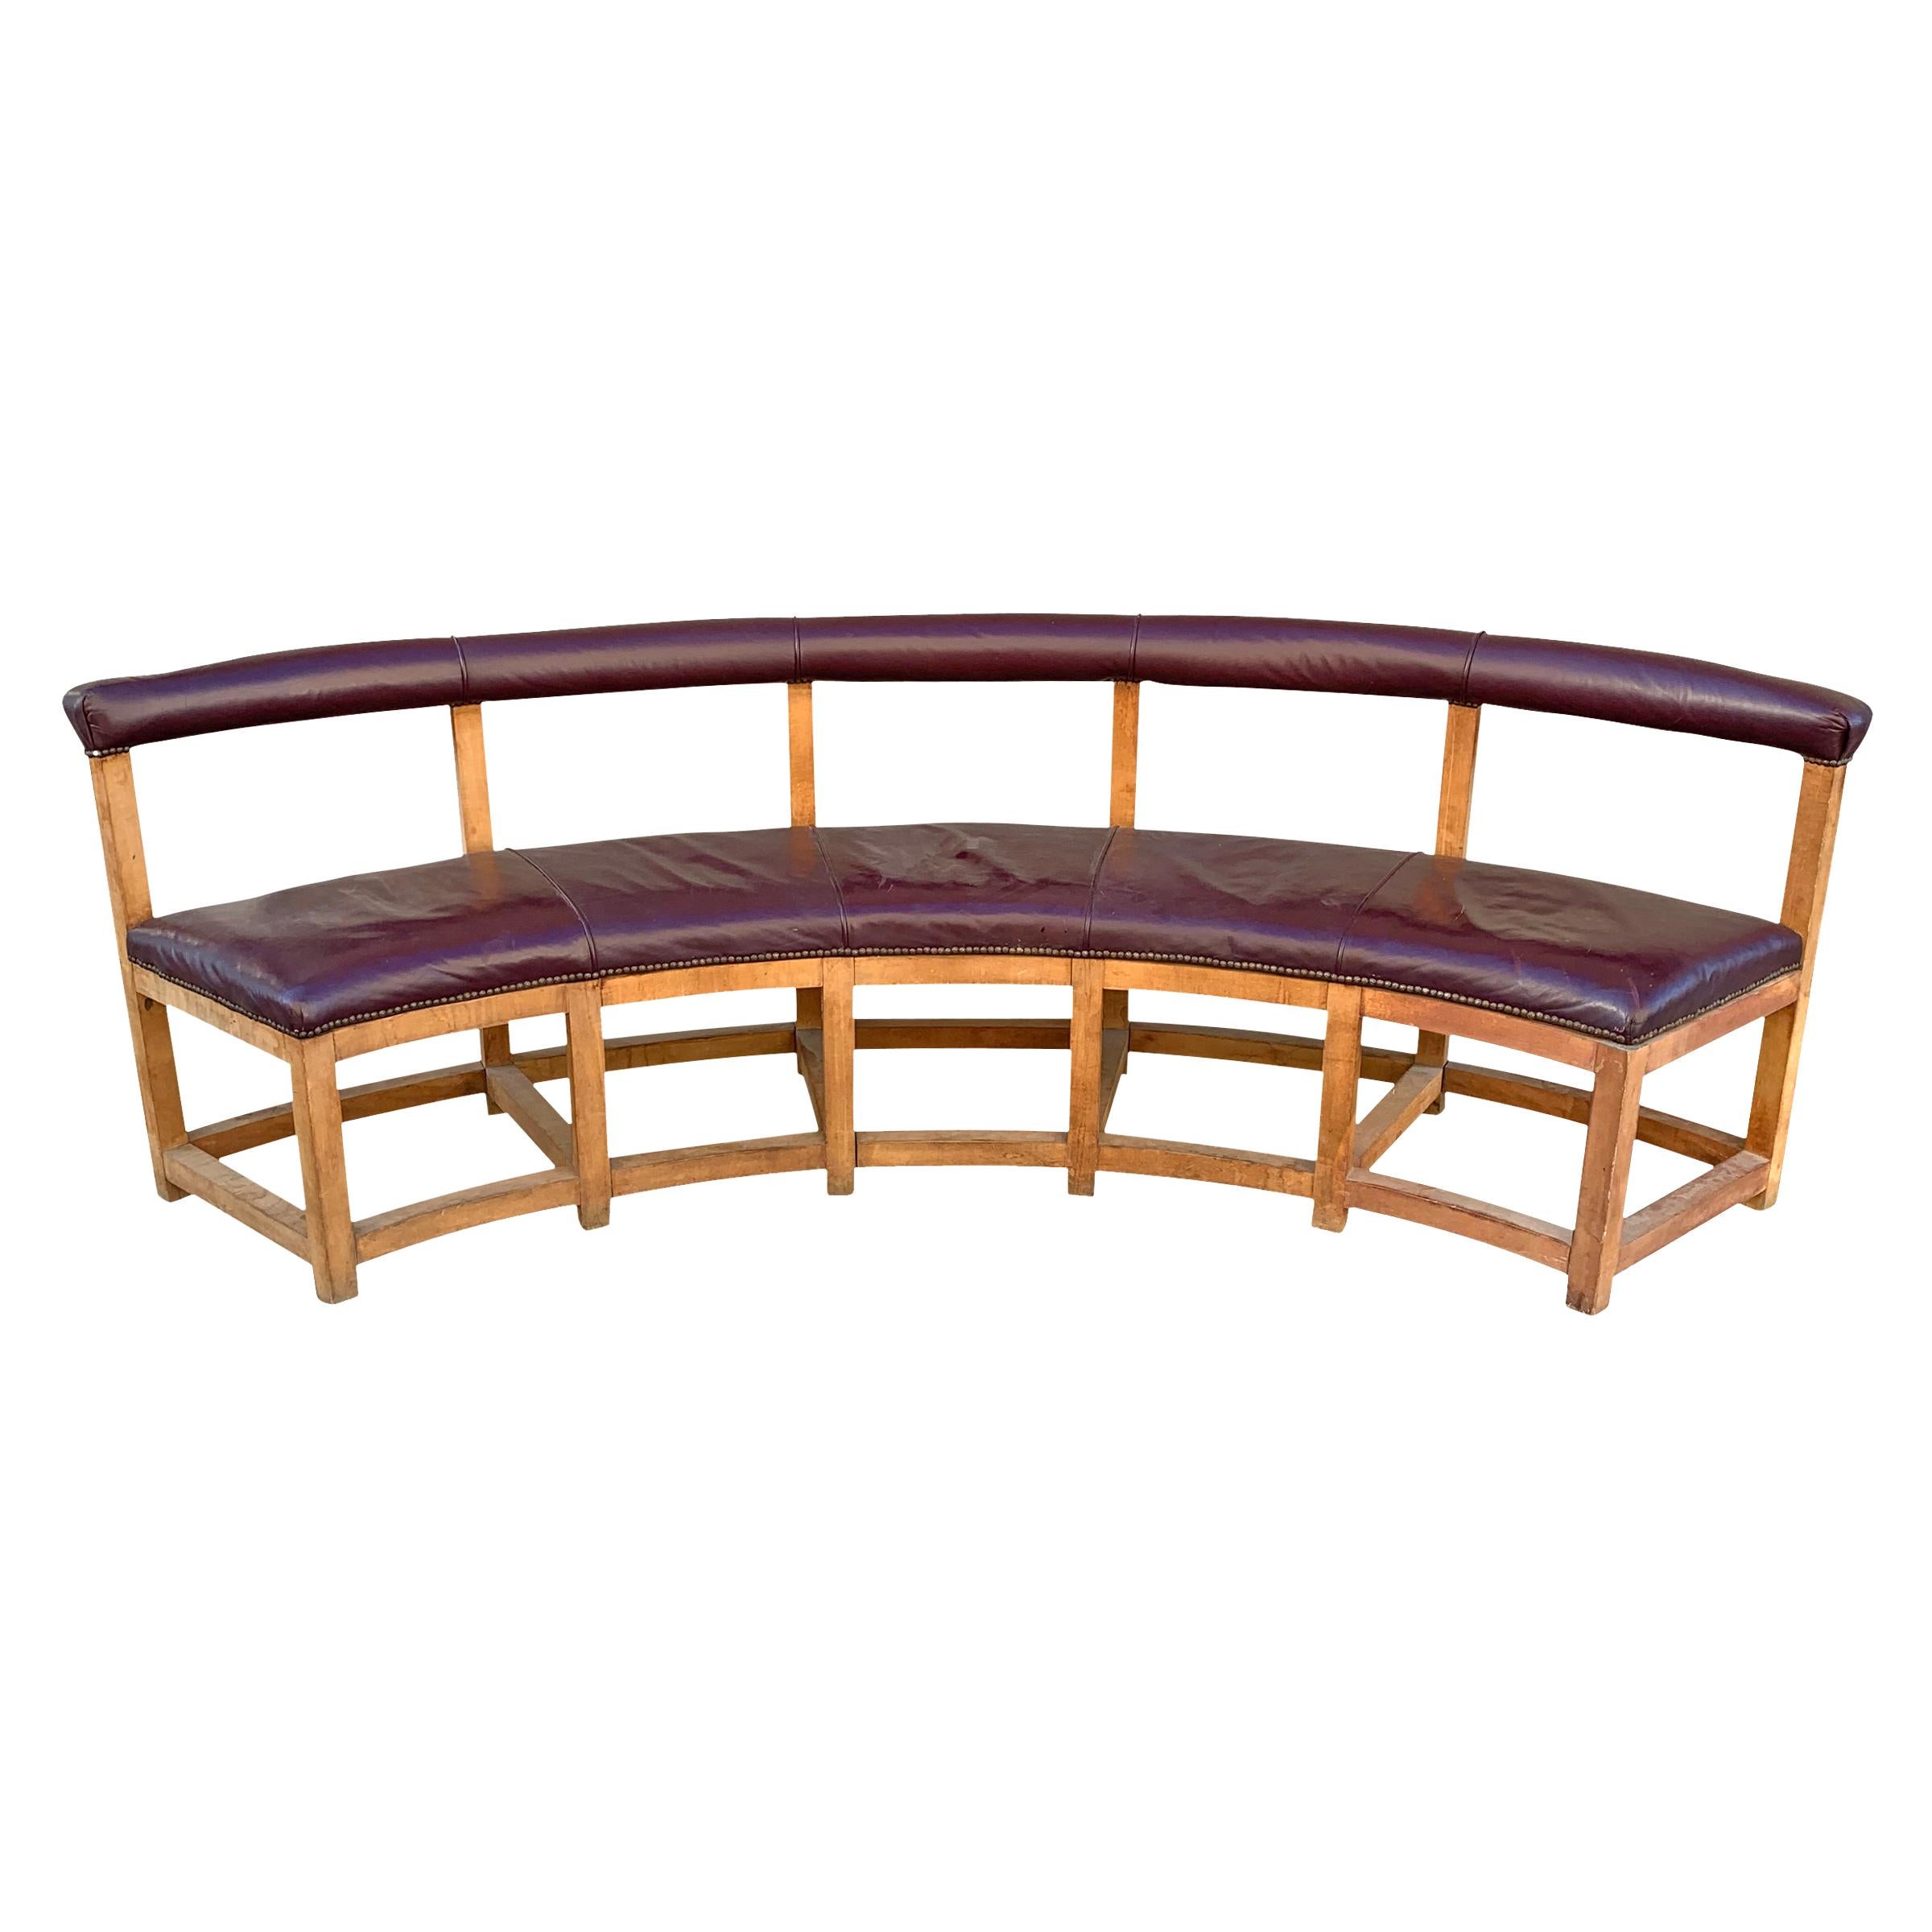 American Pair of Vintage Monumental Curved Benches